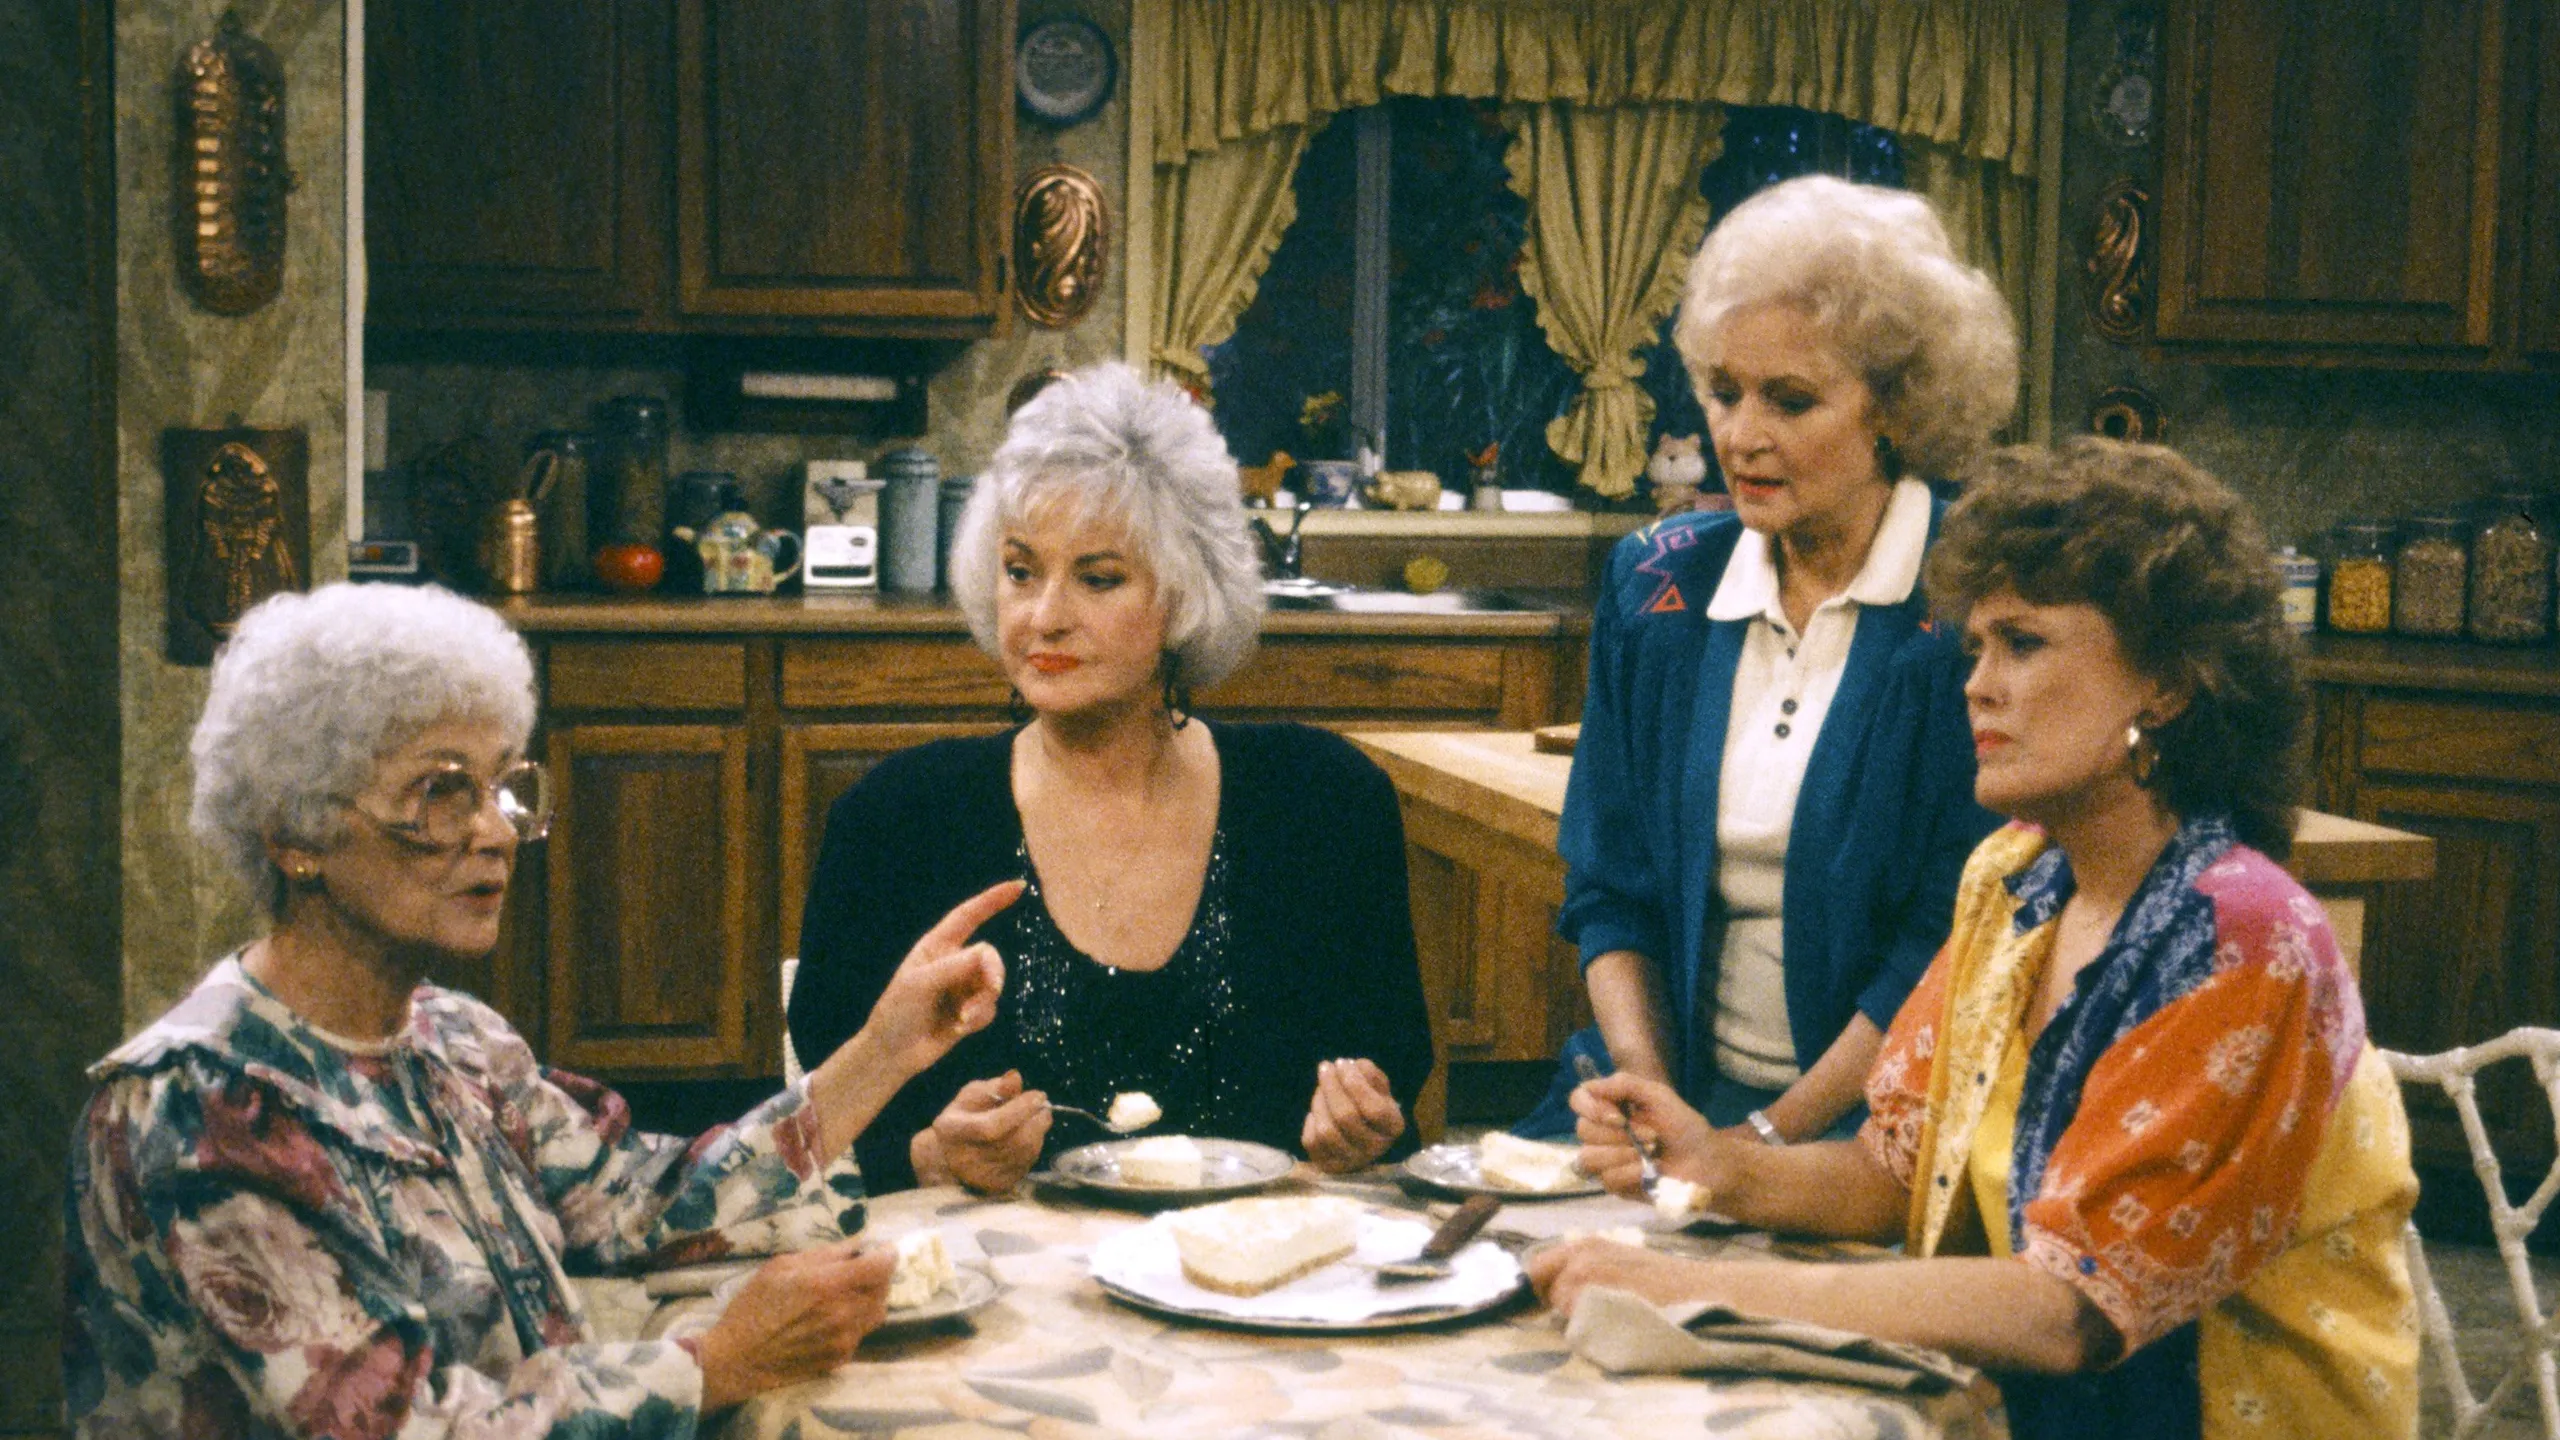 How old were the Golden Girls on the show and in real life?